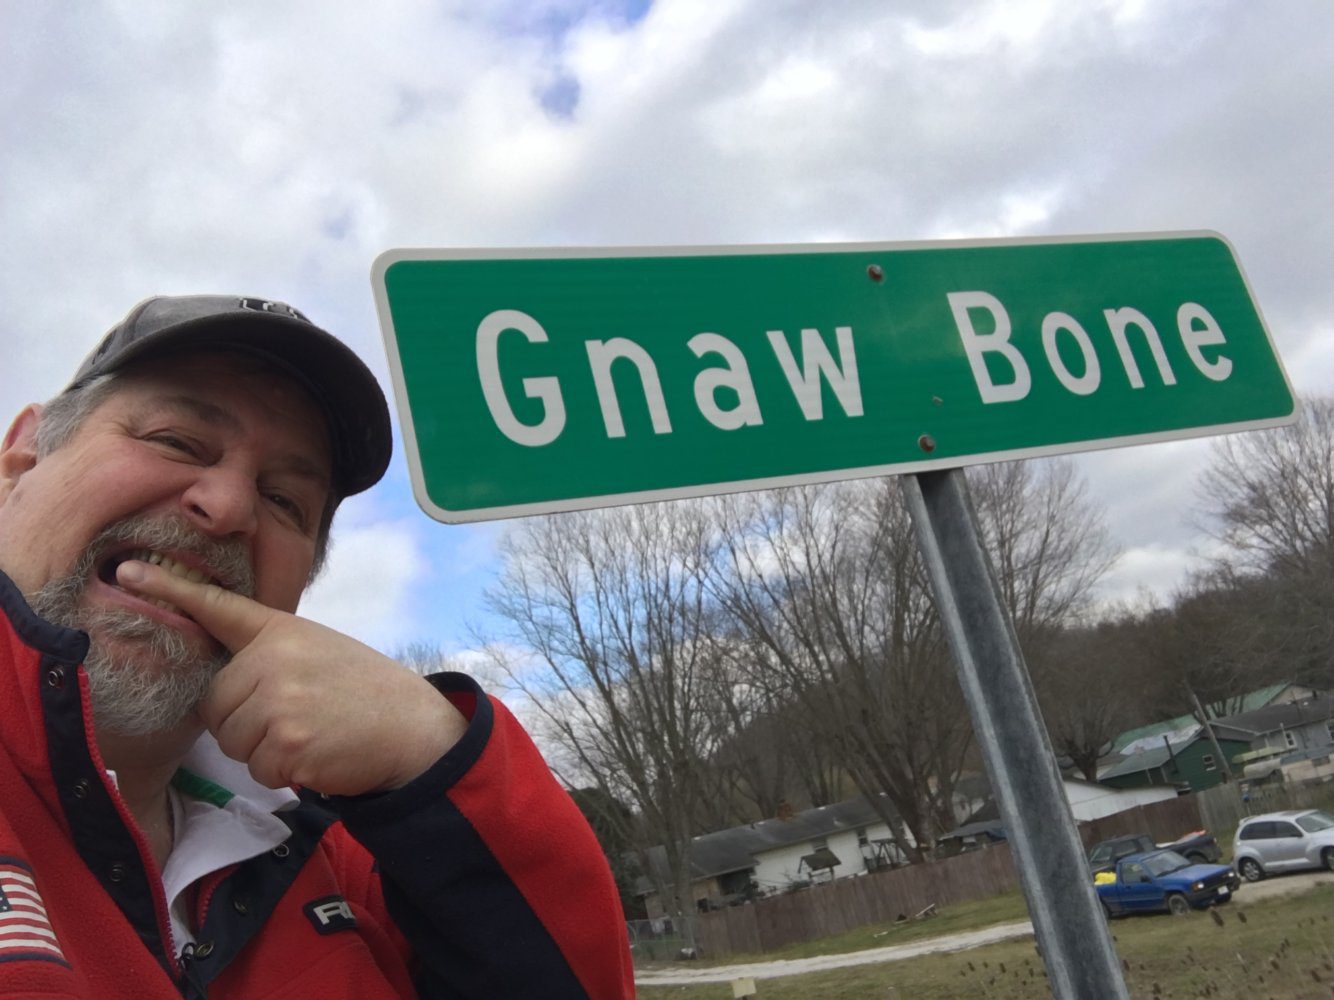 Towns of America A to Z: The G Towns #atozchallenge